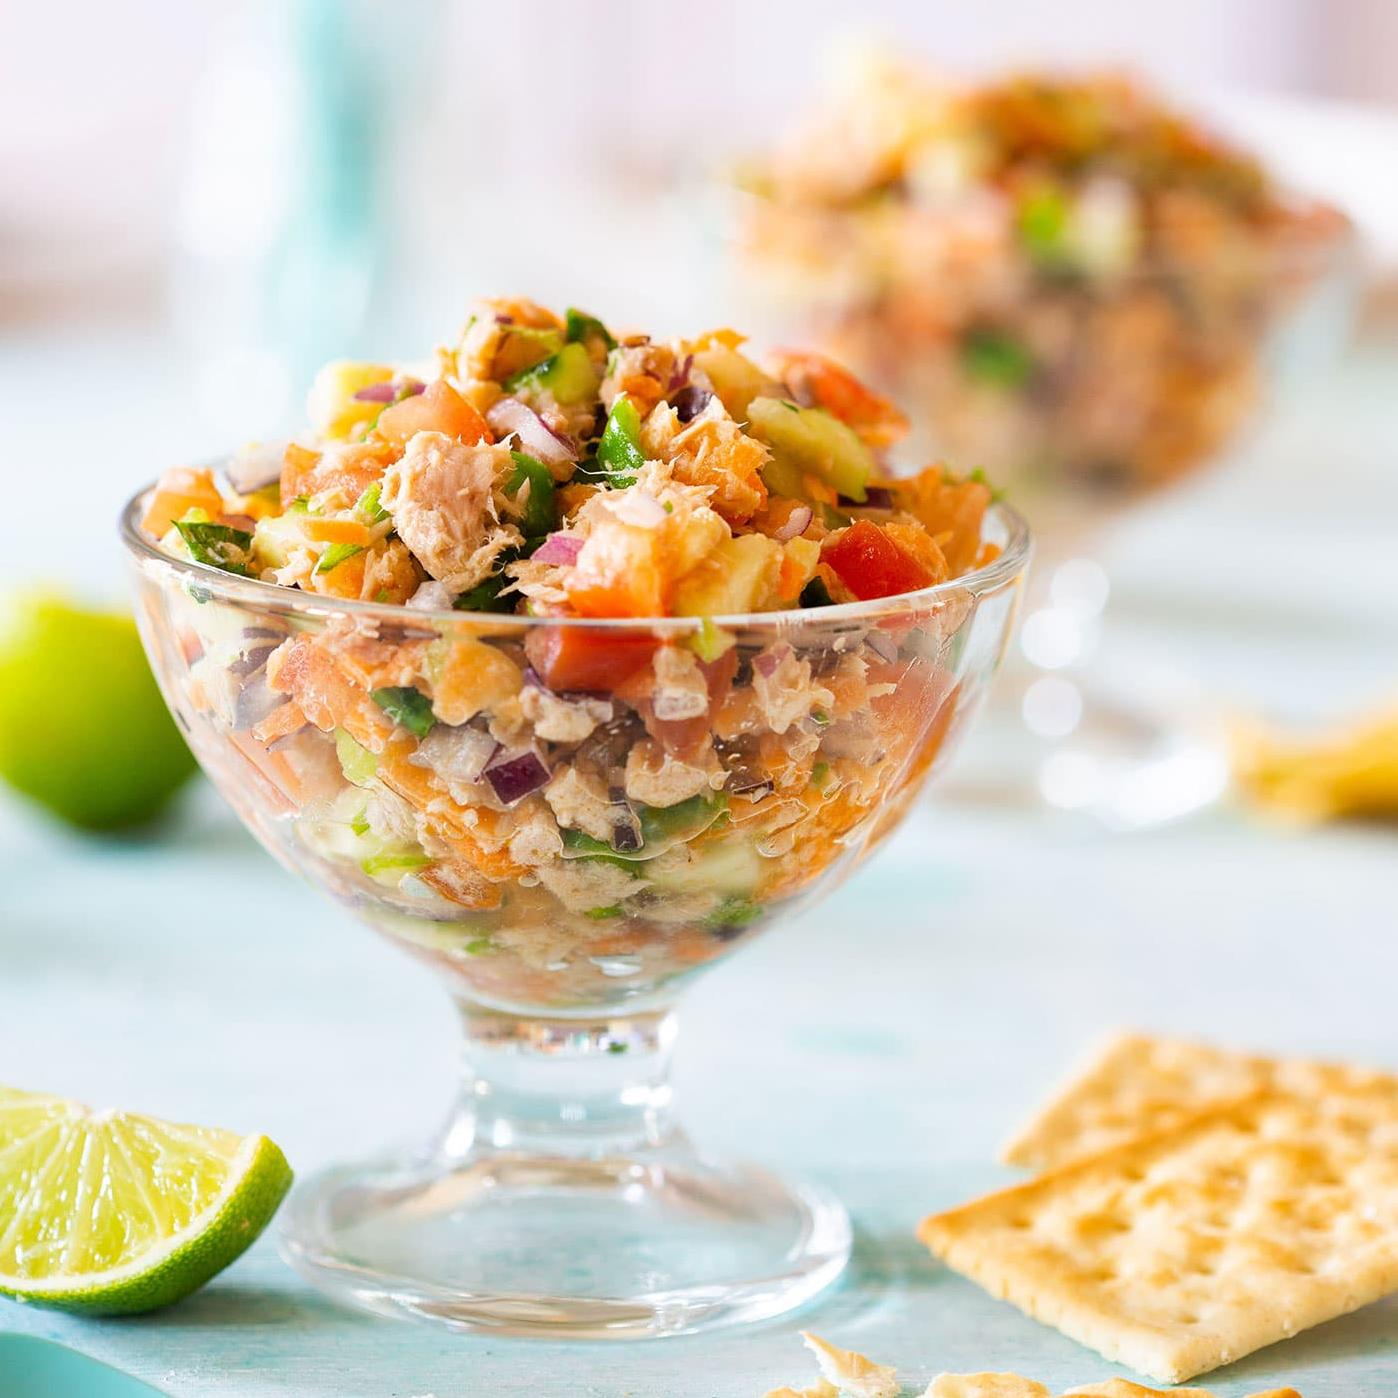  Trust me, even canned tuna tastes amazing in this ceviche!